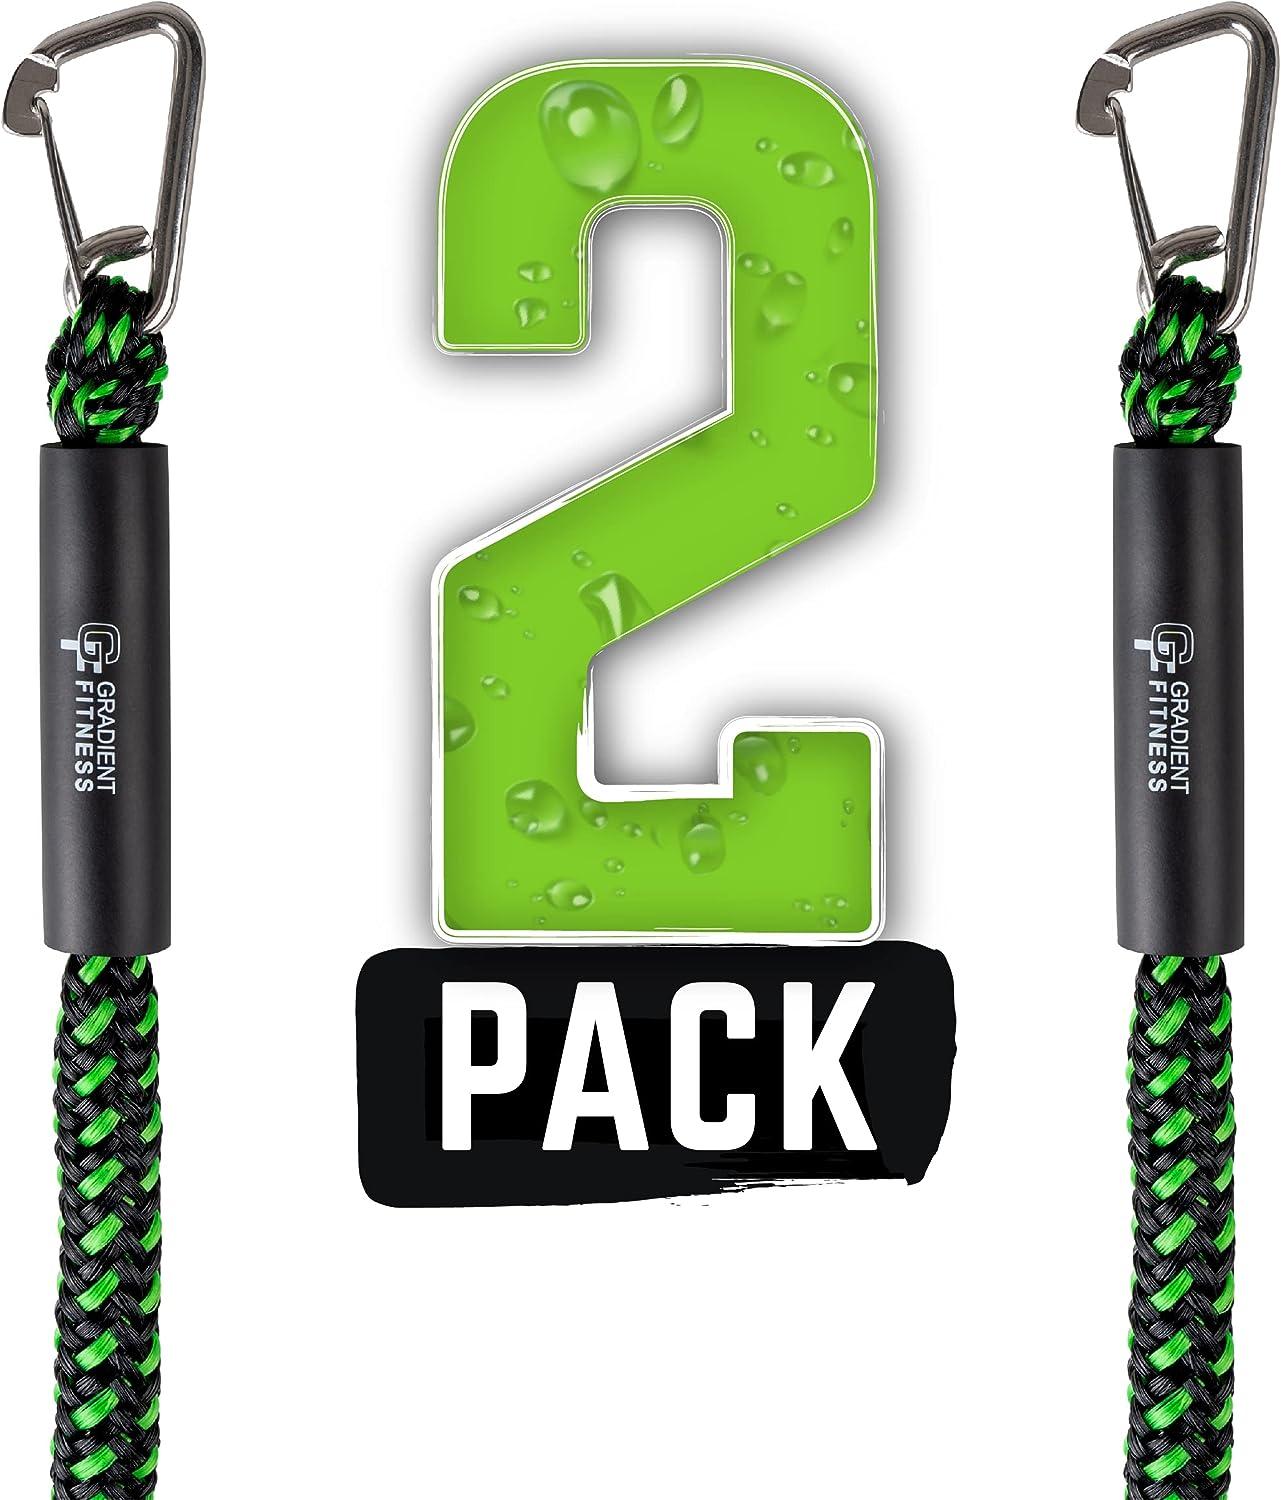 Colt Sports Bungee Dock Lines Mooring Rope for Boats - Green